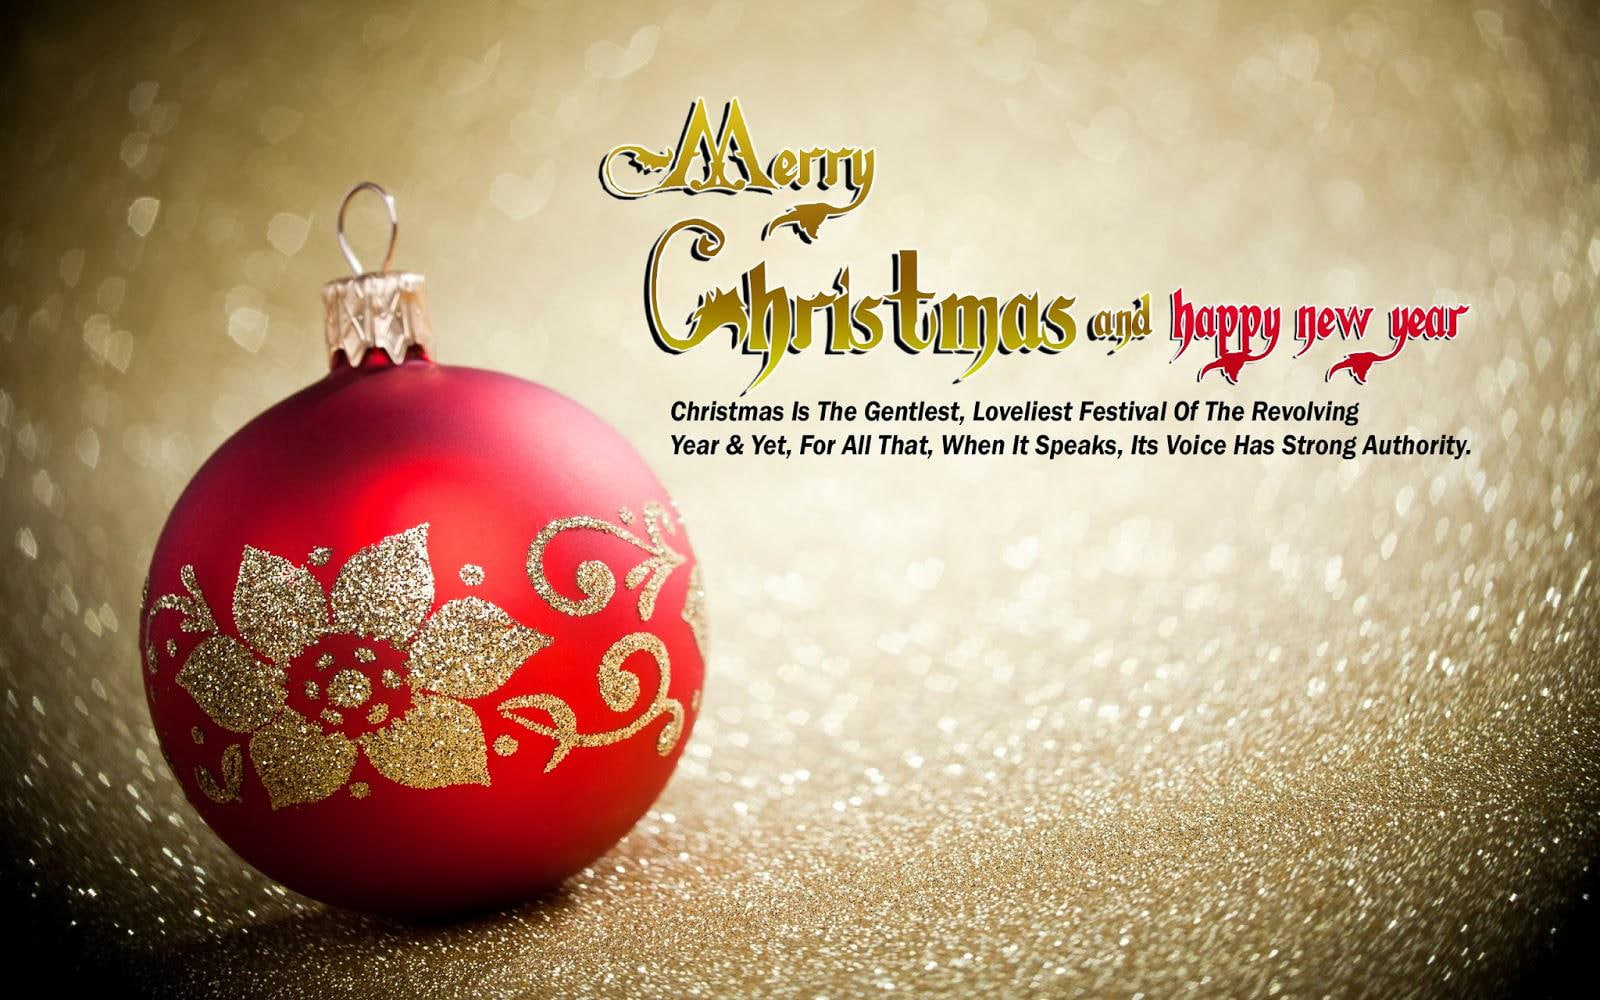 Awesome Merry Christmas and happy new year 2015